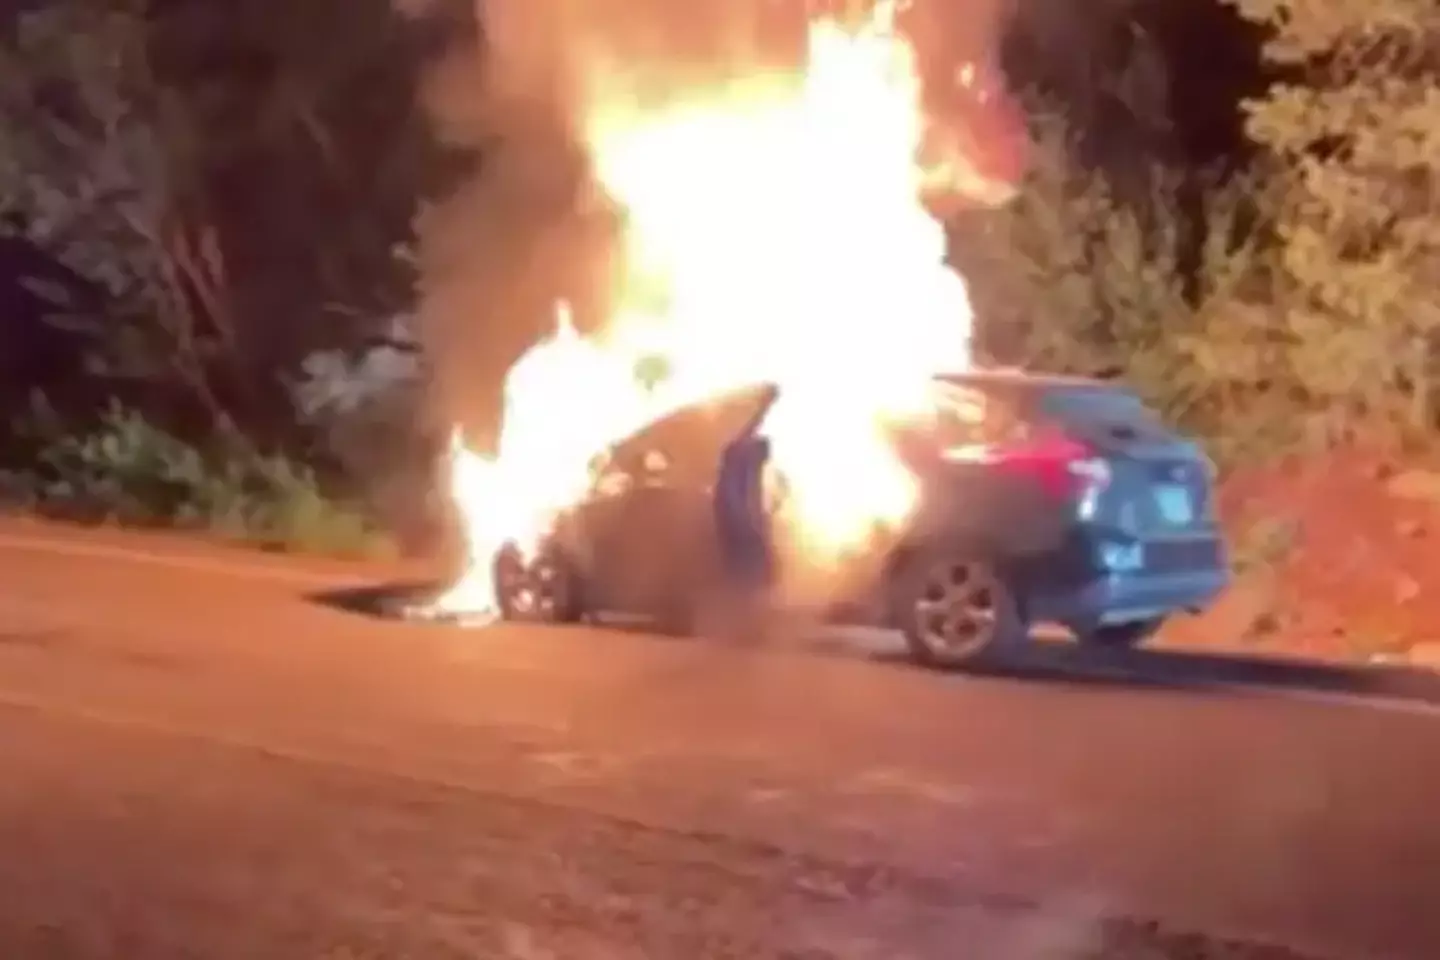 One Arizona man - who is worthy of being called a hero - helped two toddlers escape from a burning car just seconds before it exploded.